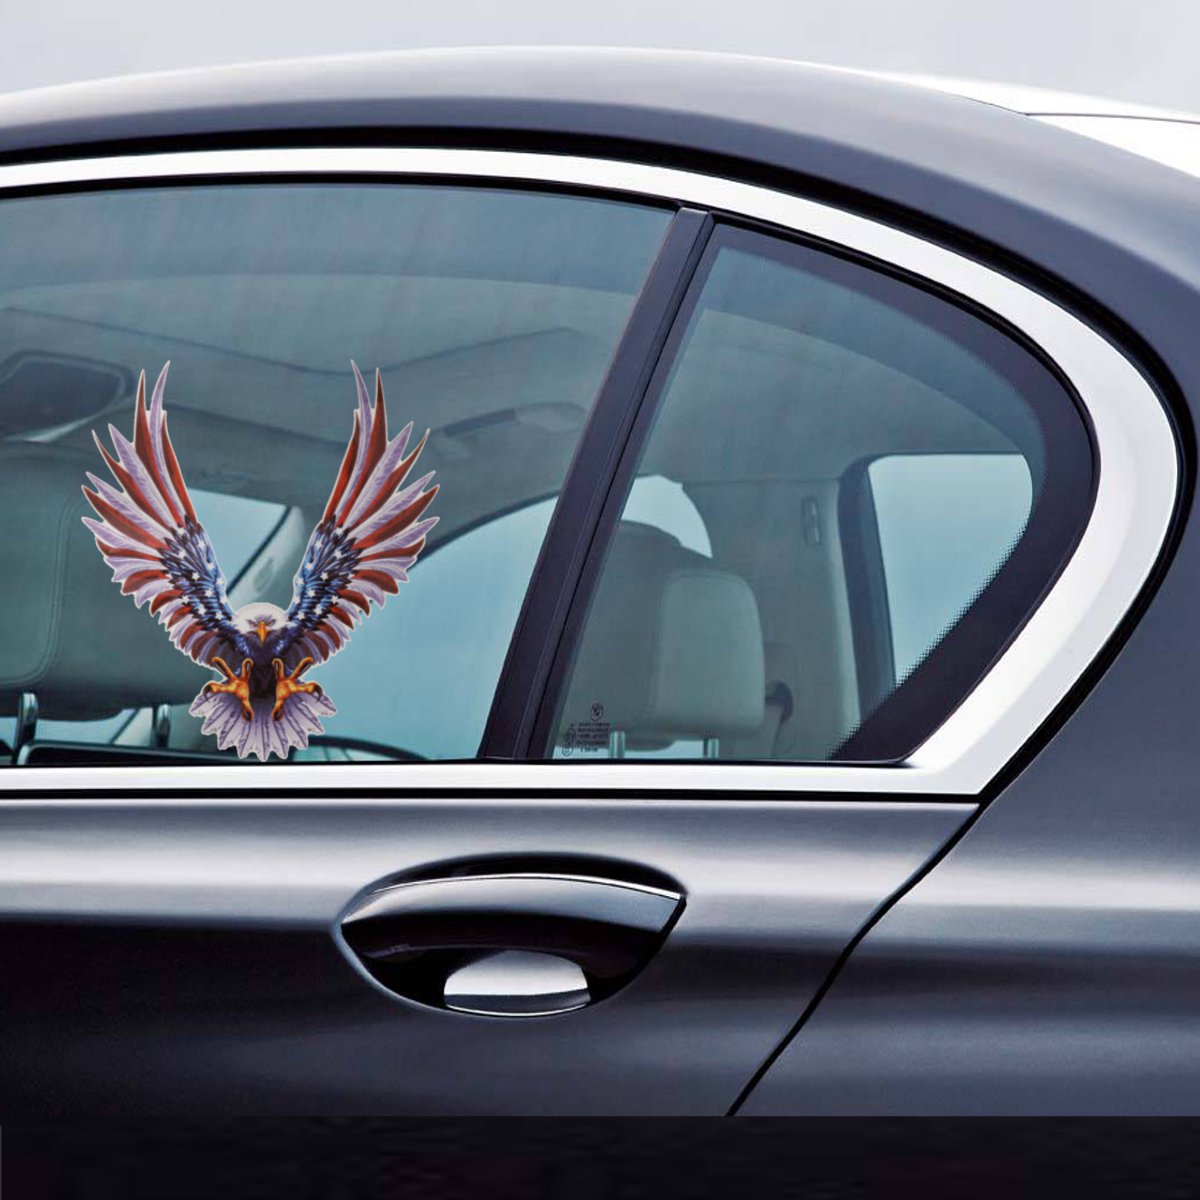 Slate Gray 6x6.75 Inch Vinyl Car USA Eagle Wings United States Flag Bumper Window Stickers Decal